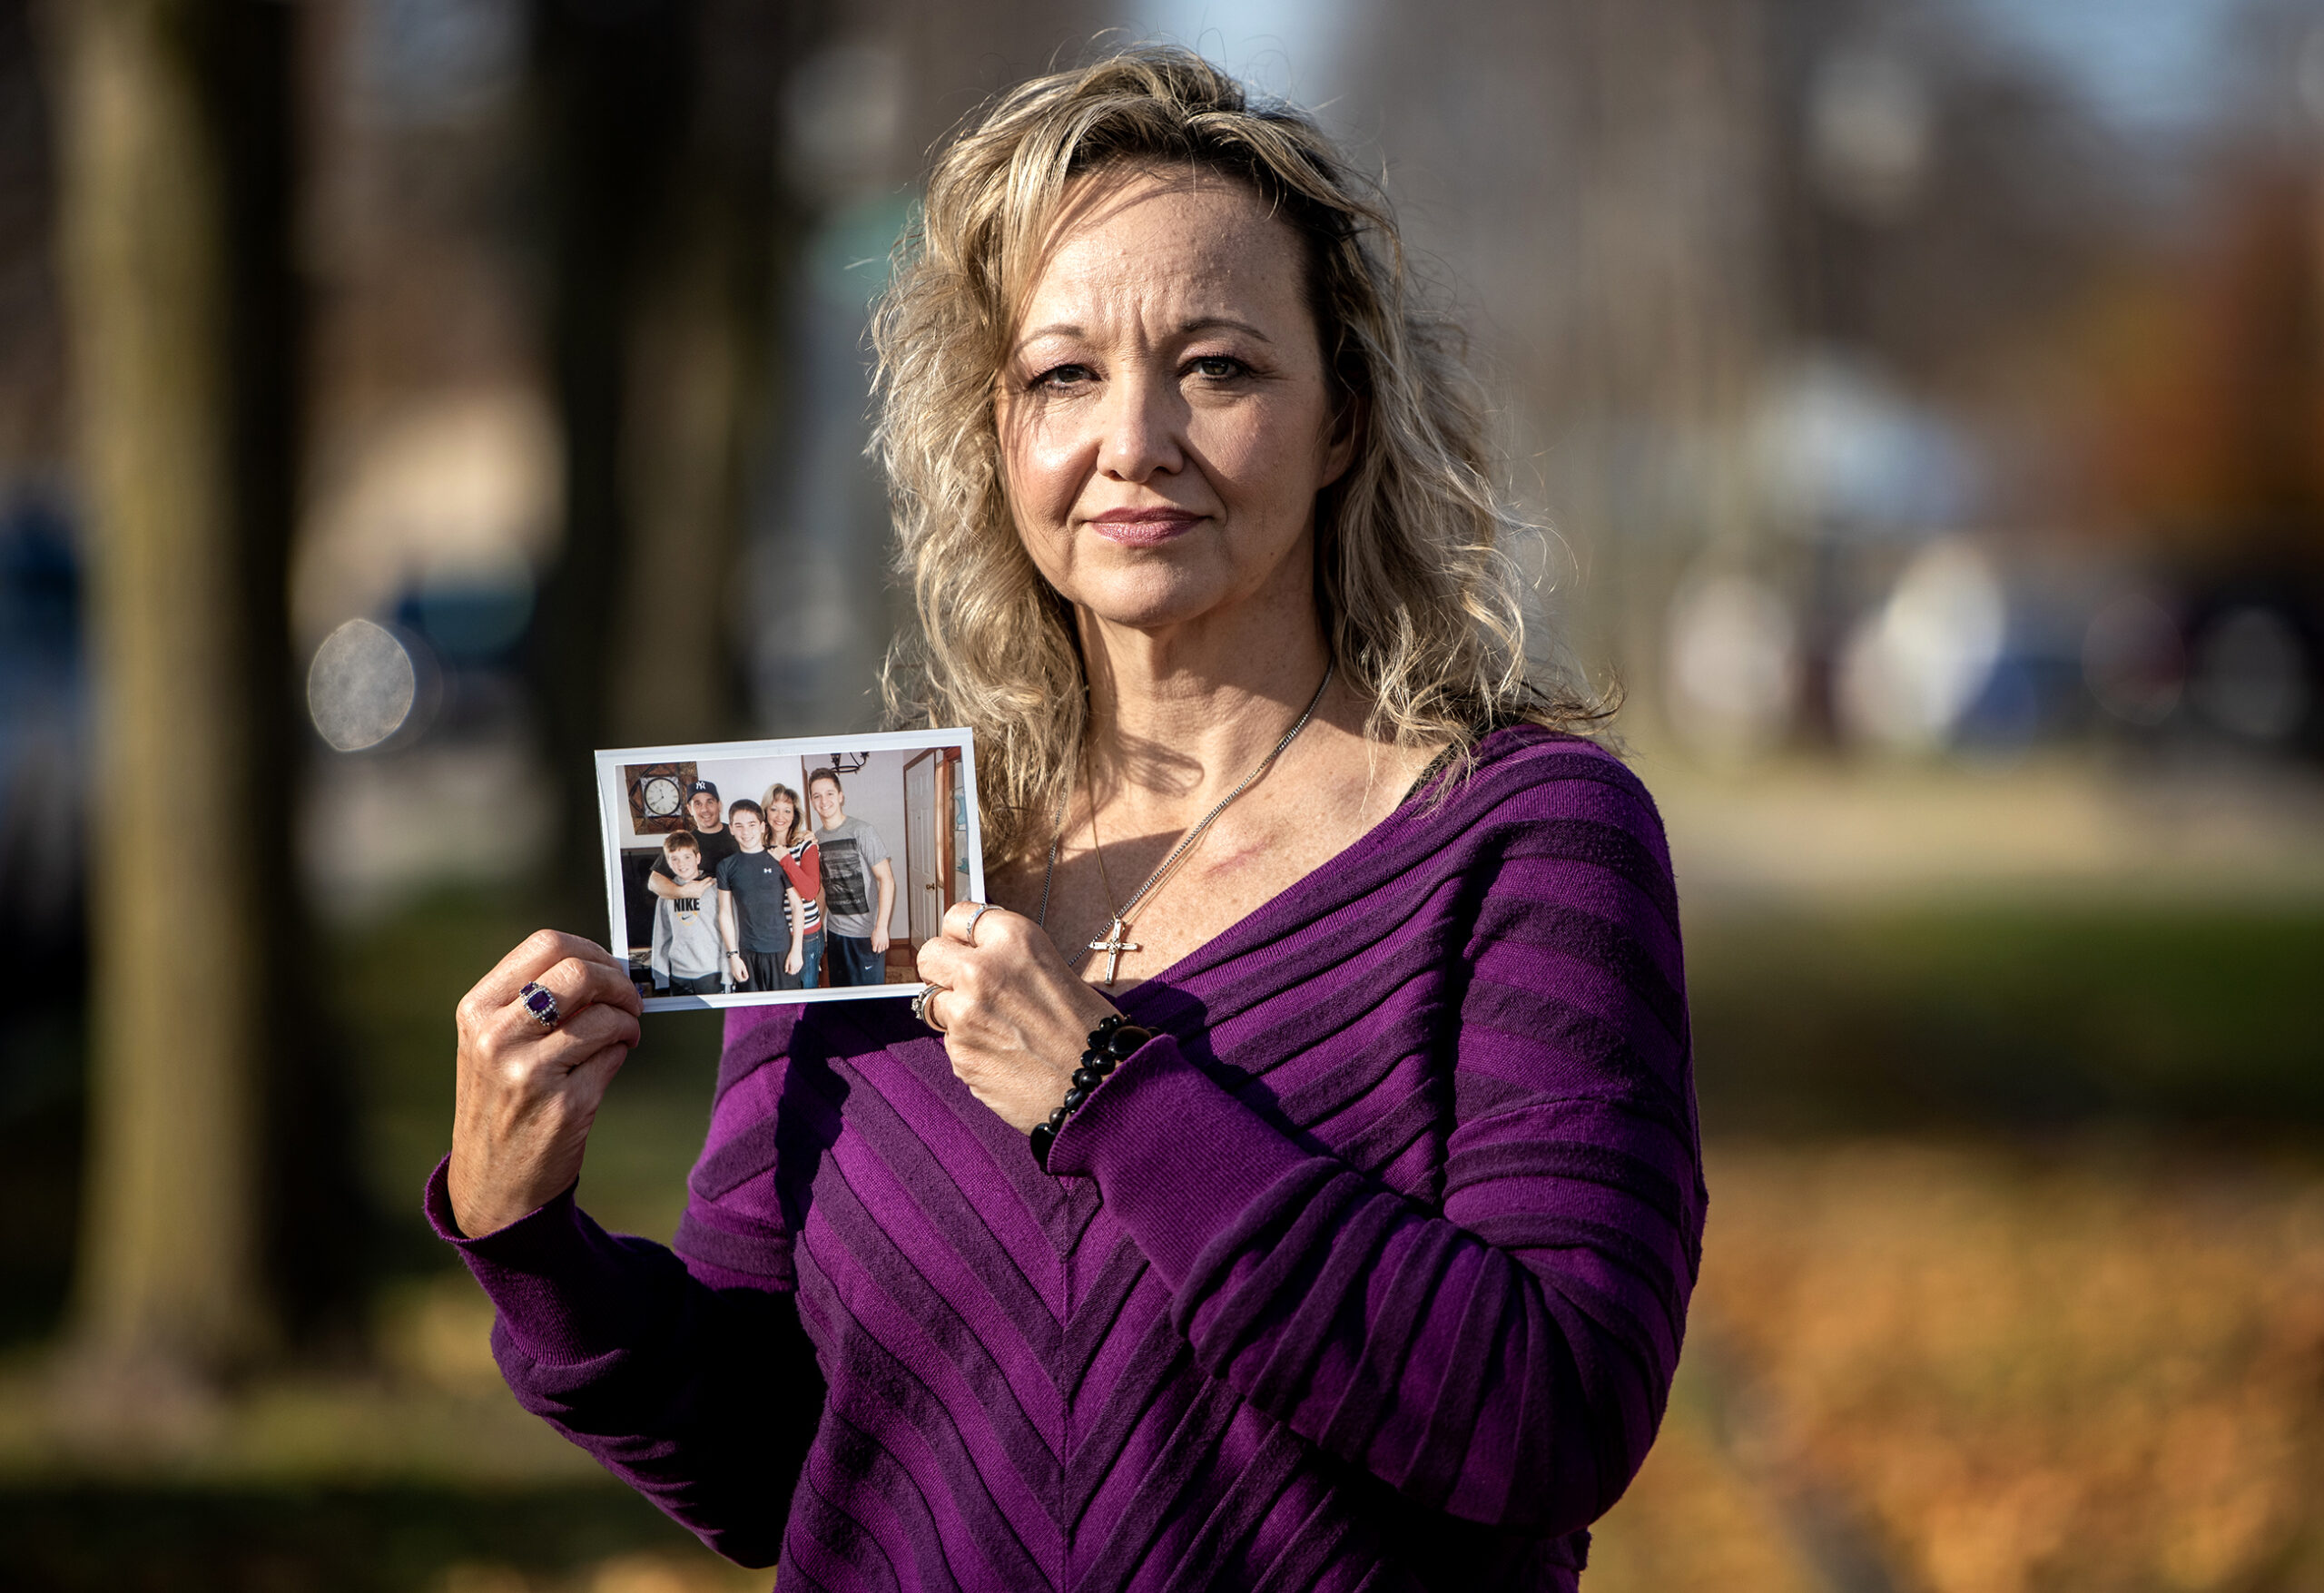 ‘How do you put yourself back together?’: 8 years after son’s suicide, Wisconsin mom forges ahead with service to others